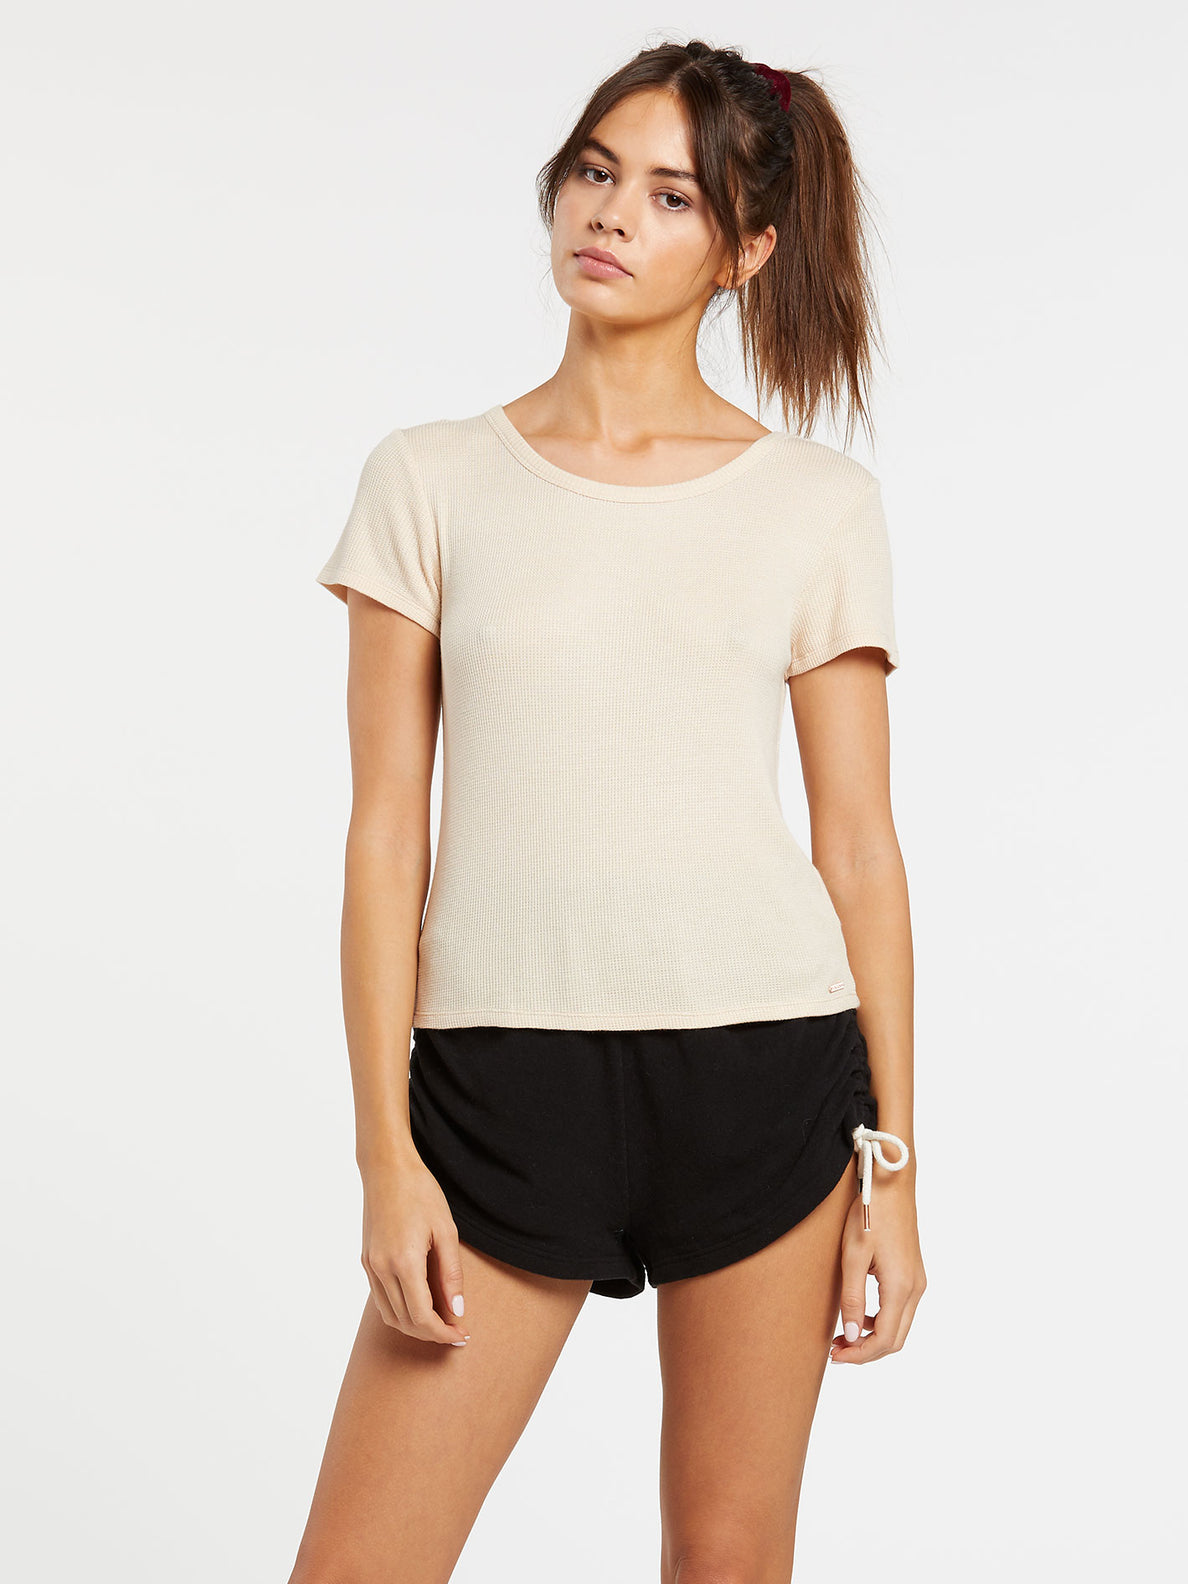 LIVED IN LOUNGE THERMAL SHORT SLEEVE - SAND